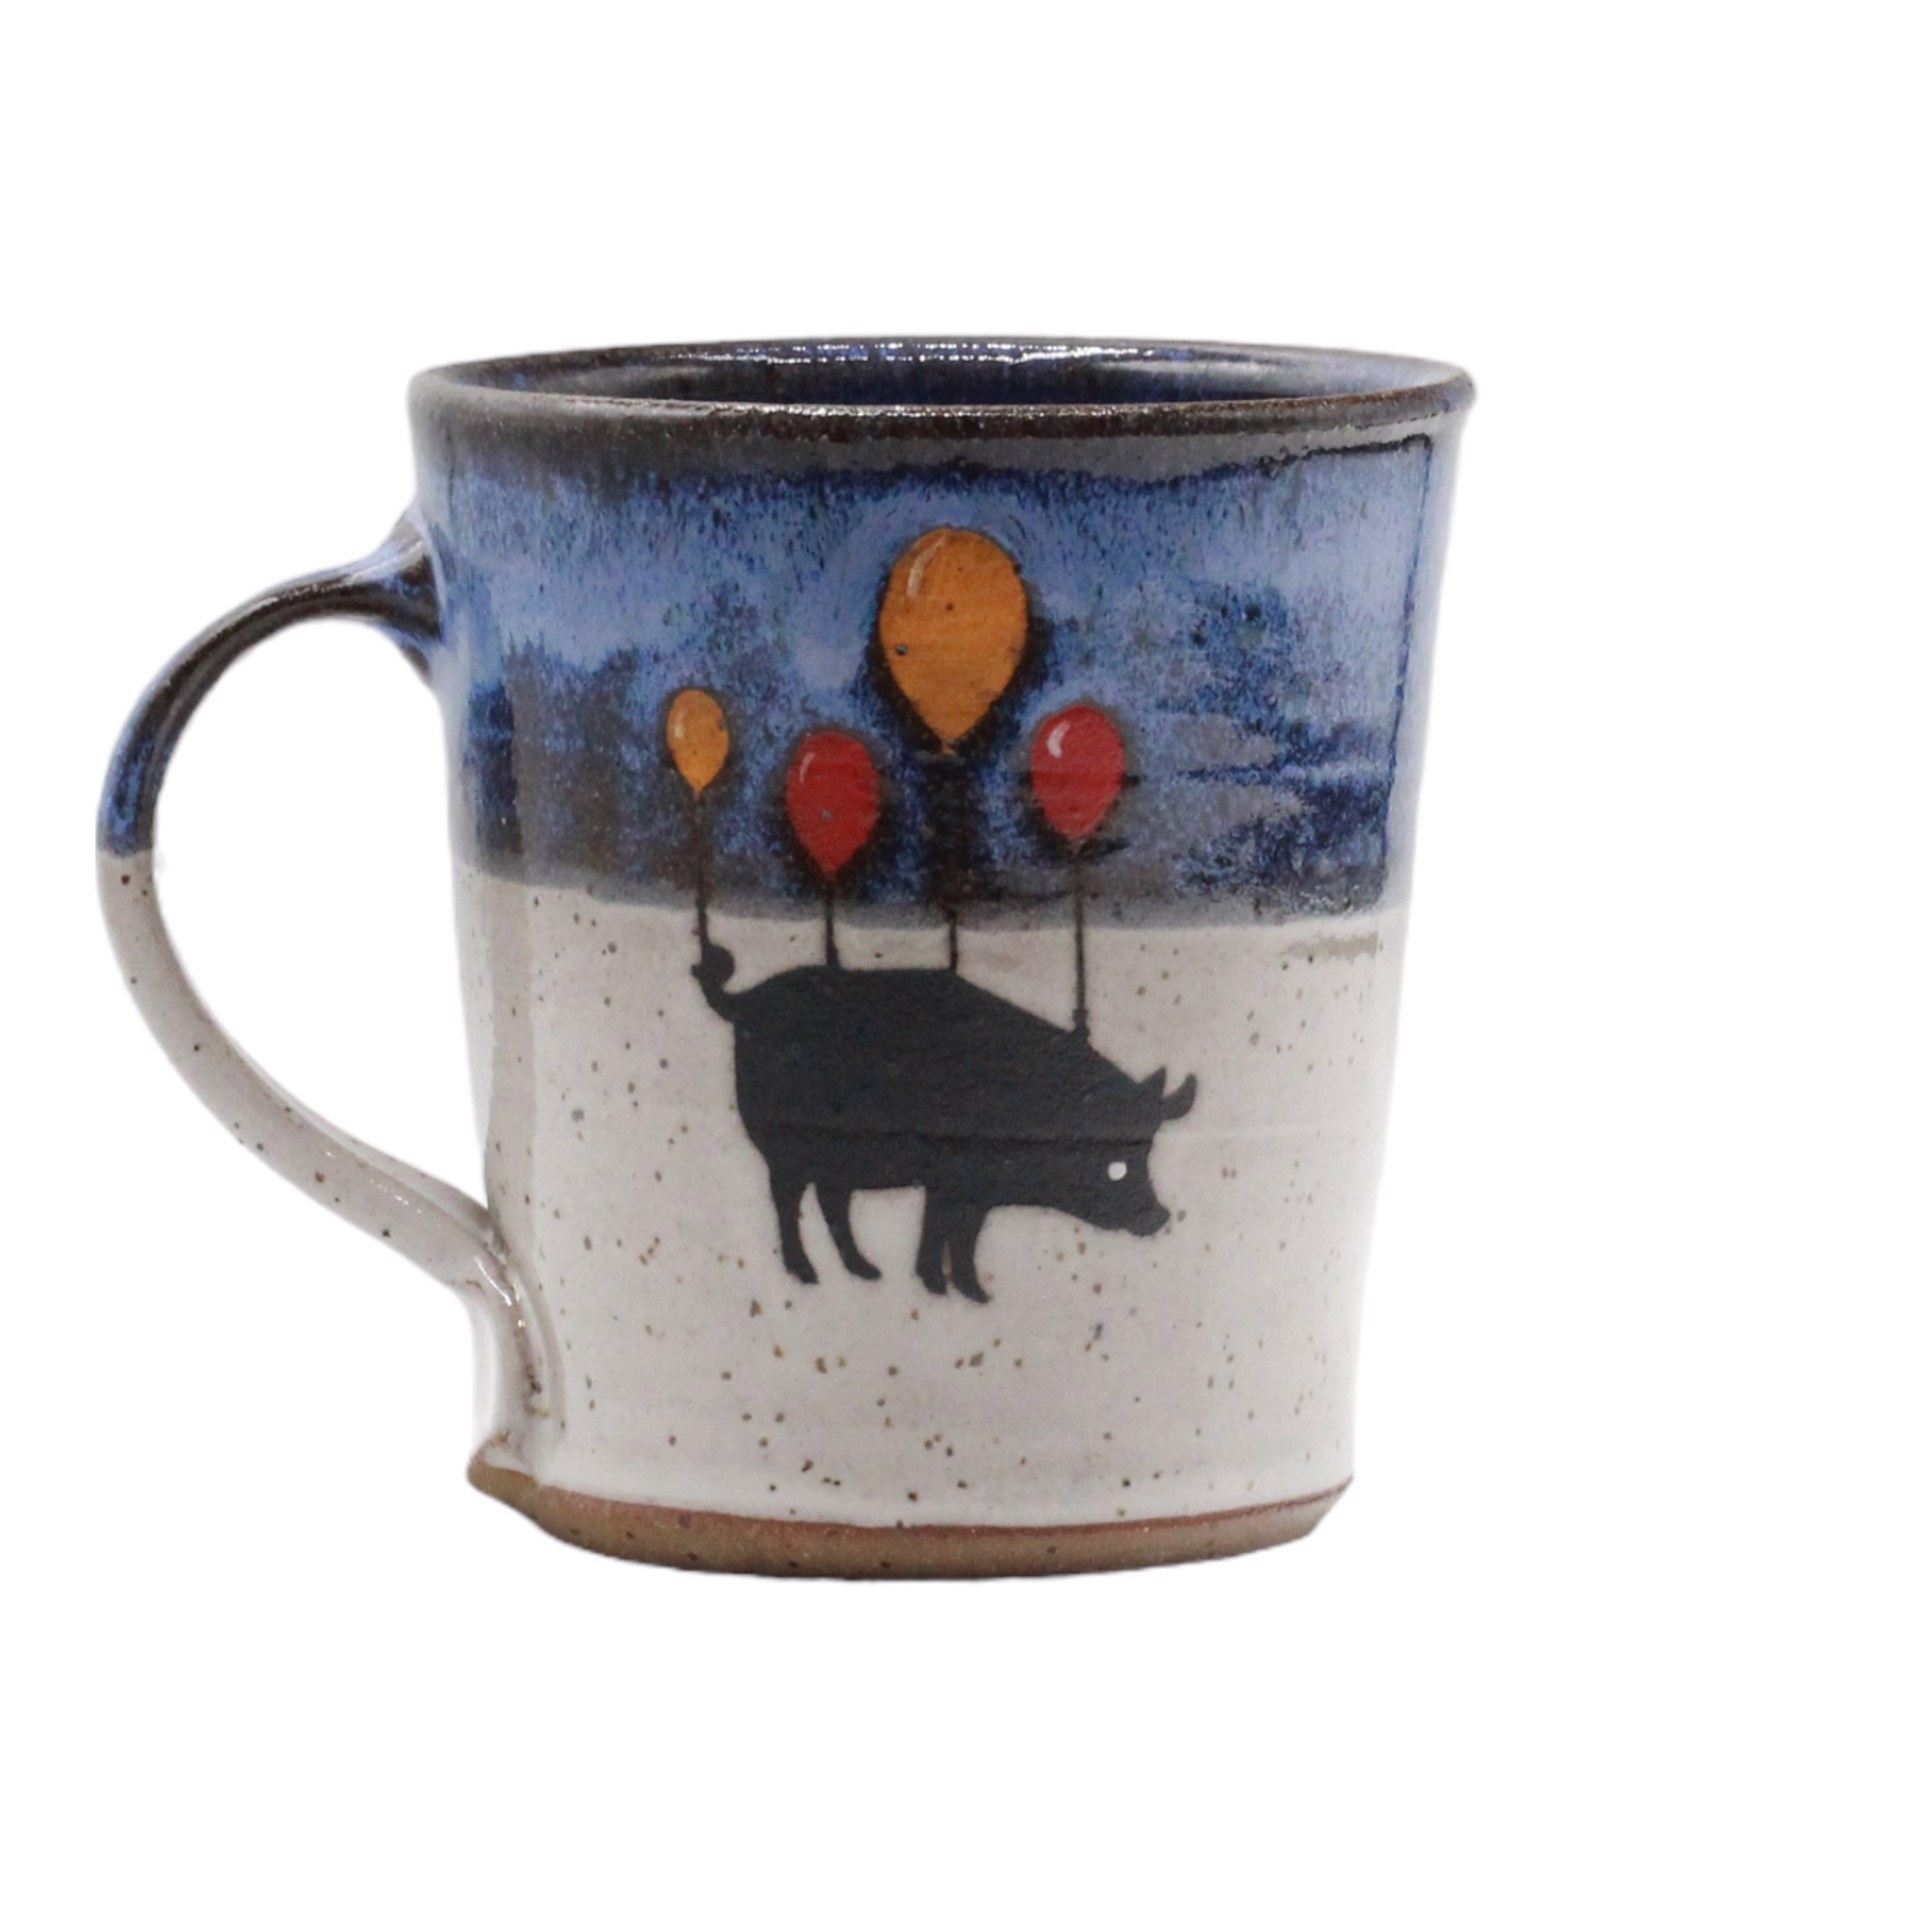 When Pigs Fly Mug by Stephen Mullins